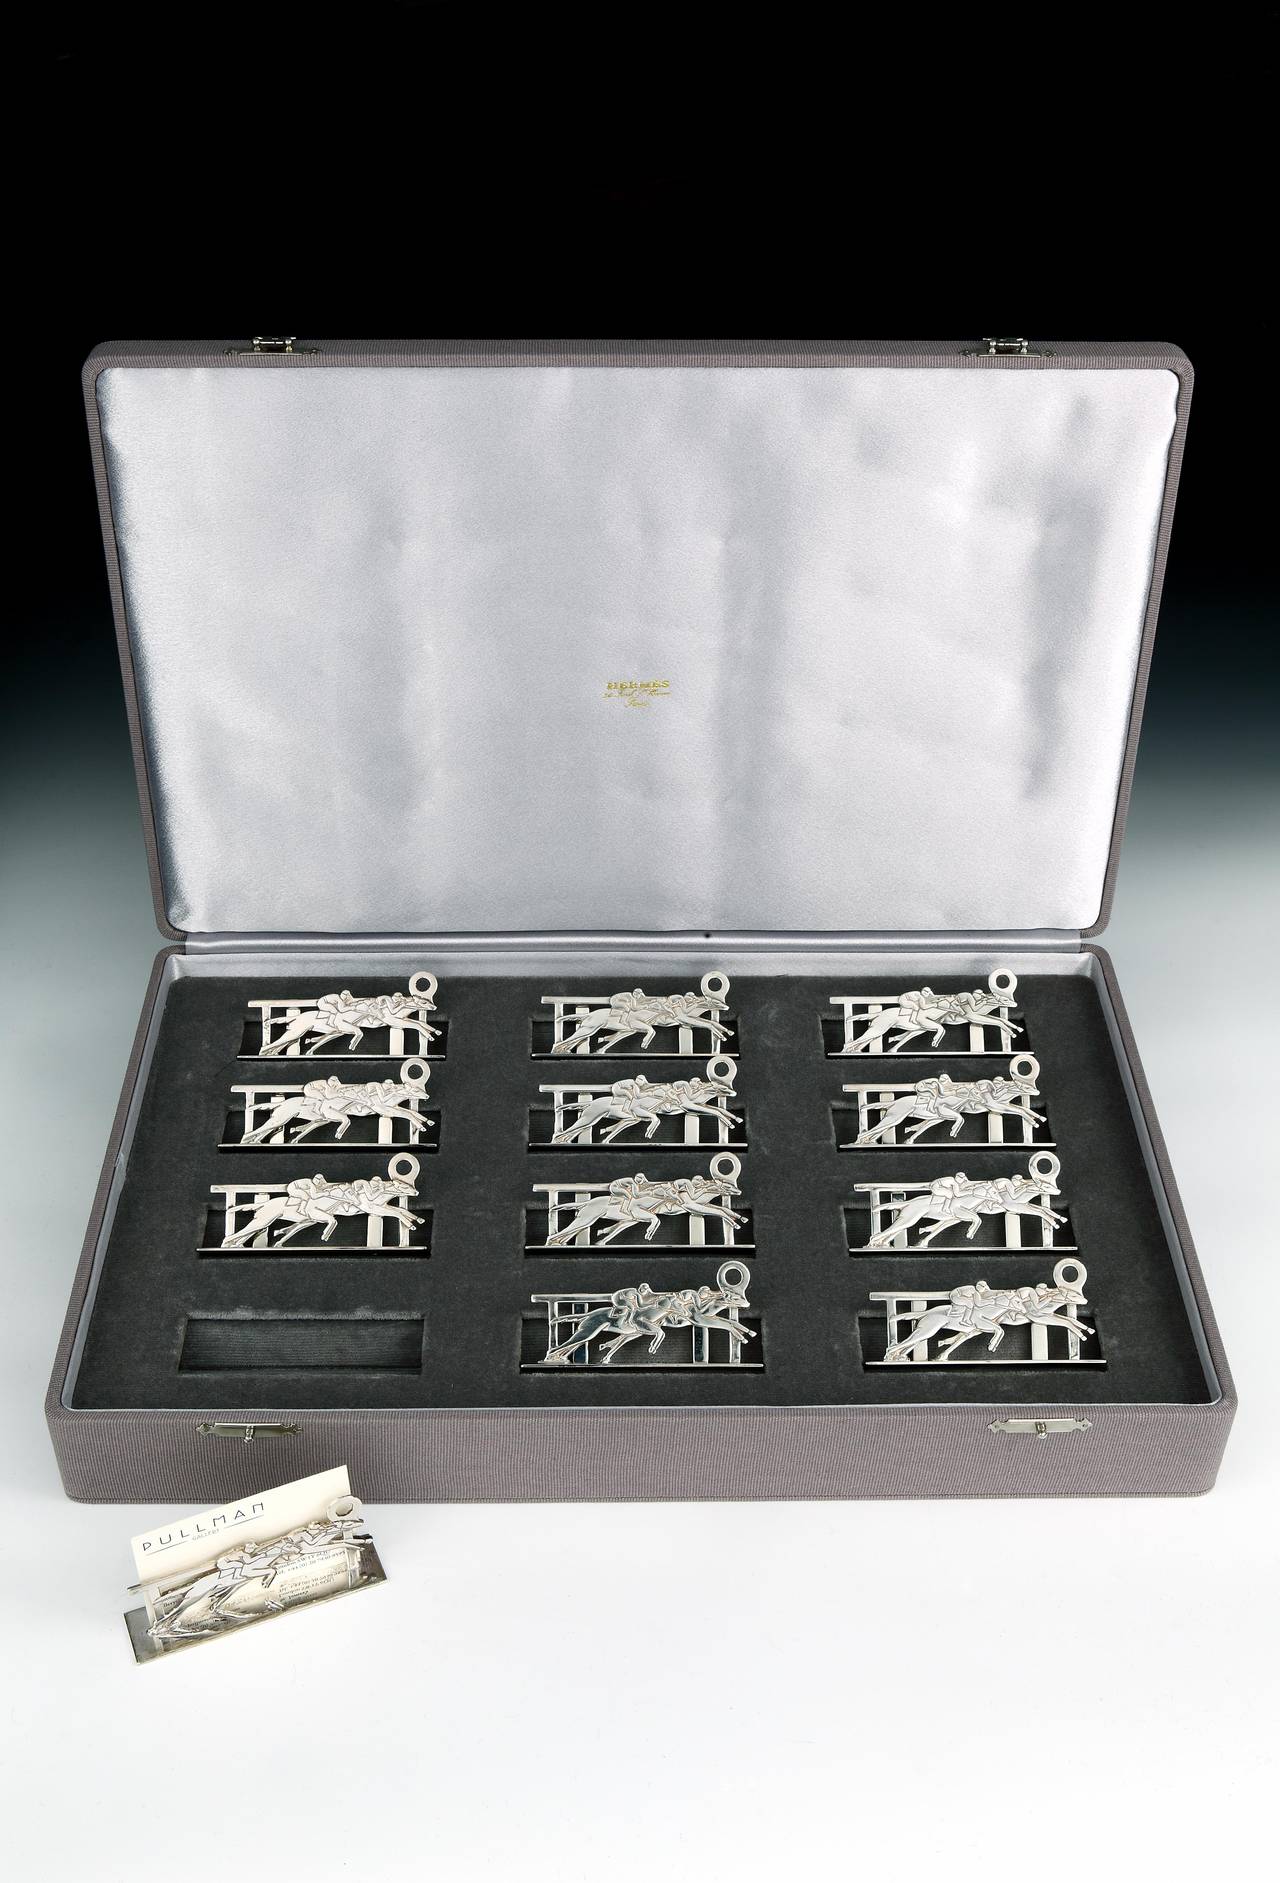 A fine set of 12 sterling silver Art Deco-style place-card or menu holders in the form of two racehorses crossing the winning post.

Each holder stamped Hermés Paris to the base. The set has a fully refurbished, grey grosgrain Hermés